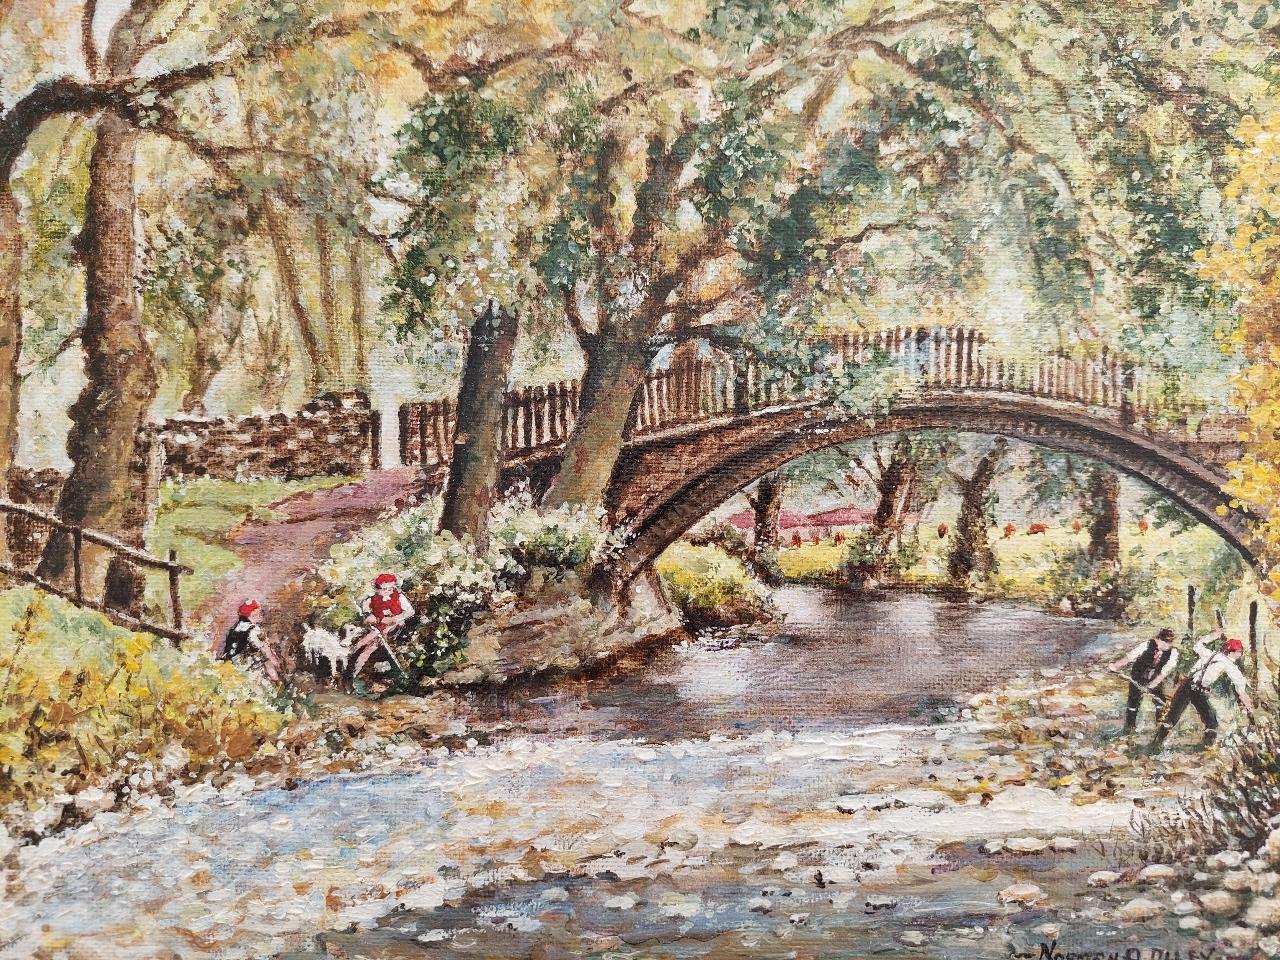 Other Traditional English Painting River Workers, Beckford Bridge Bingley Yorkshire For Sale